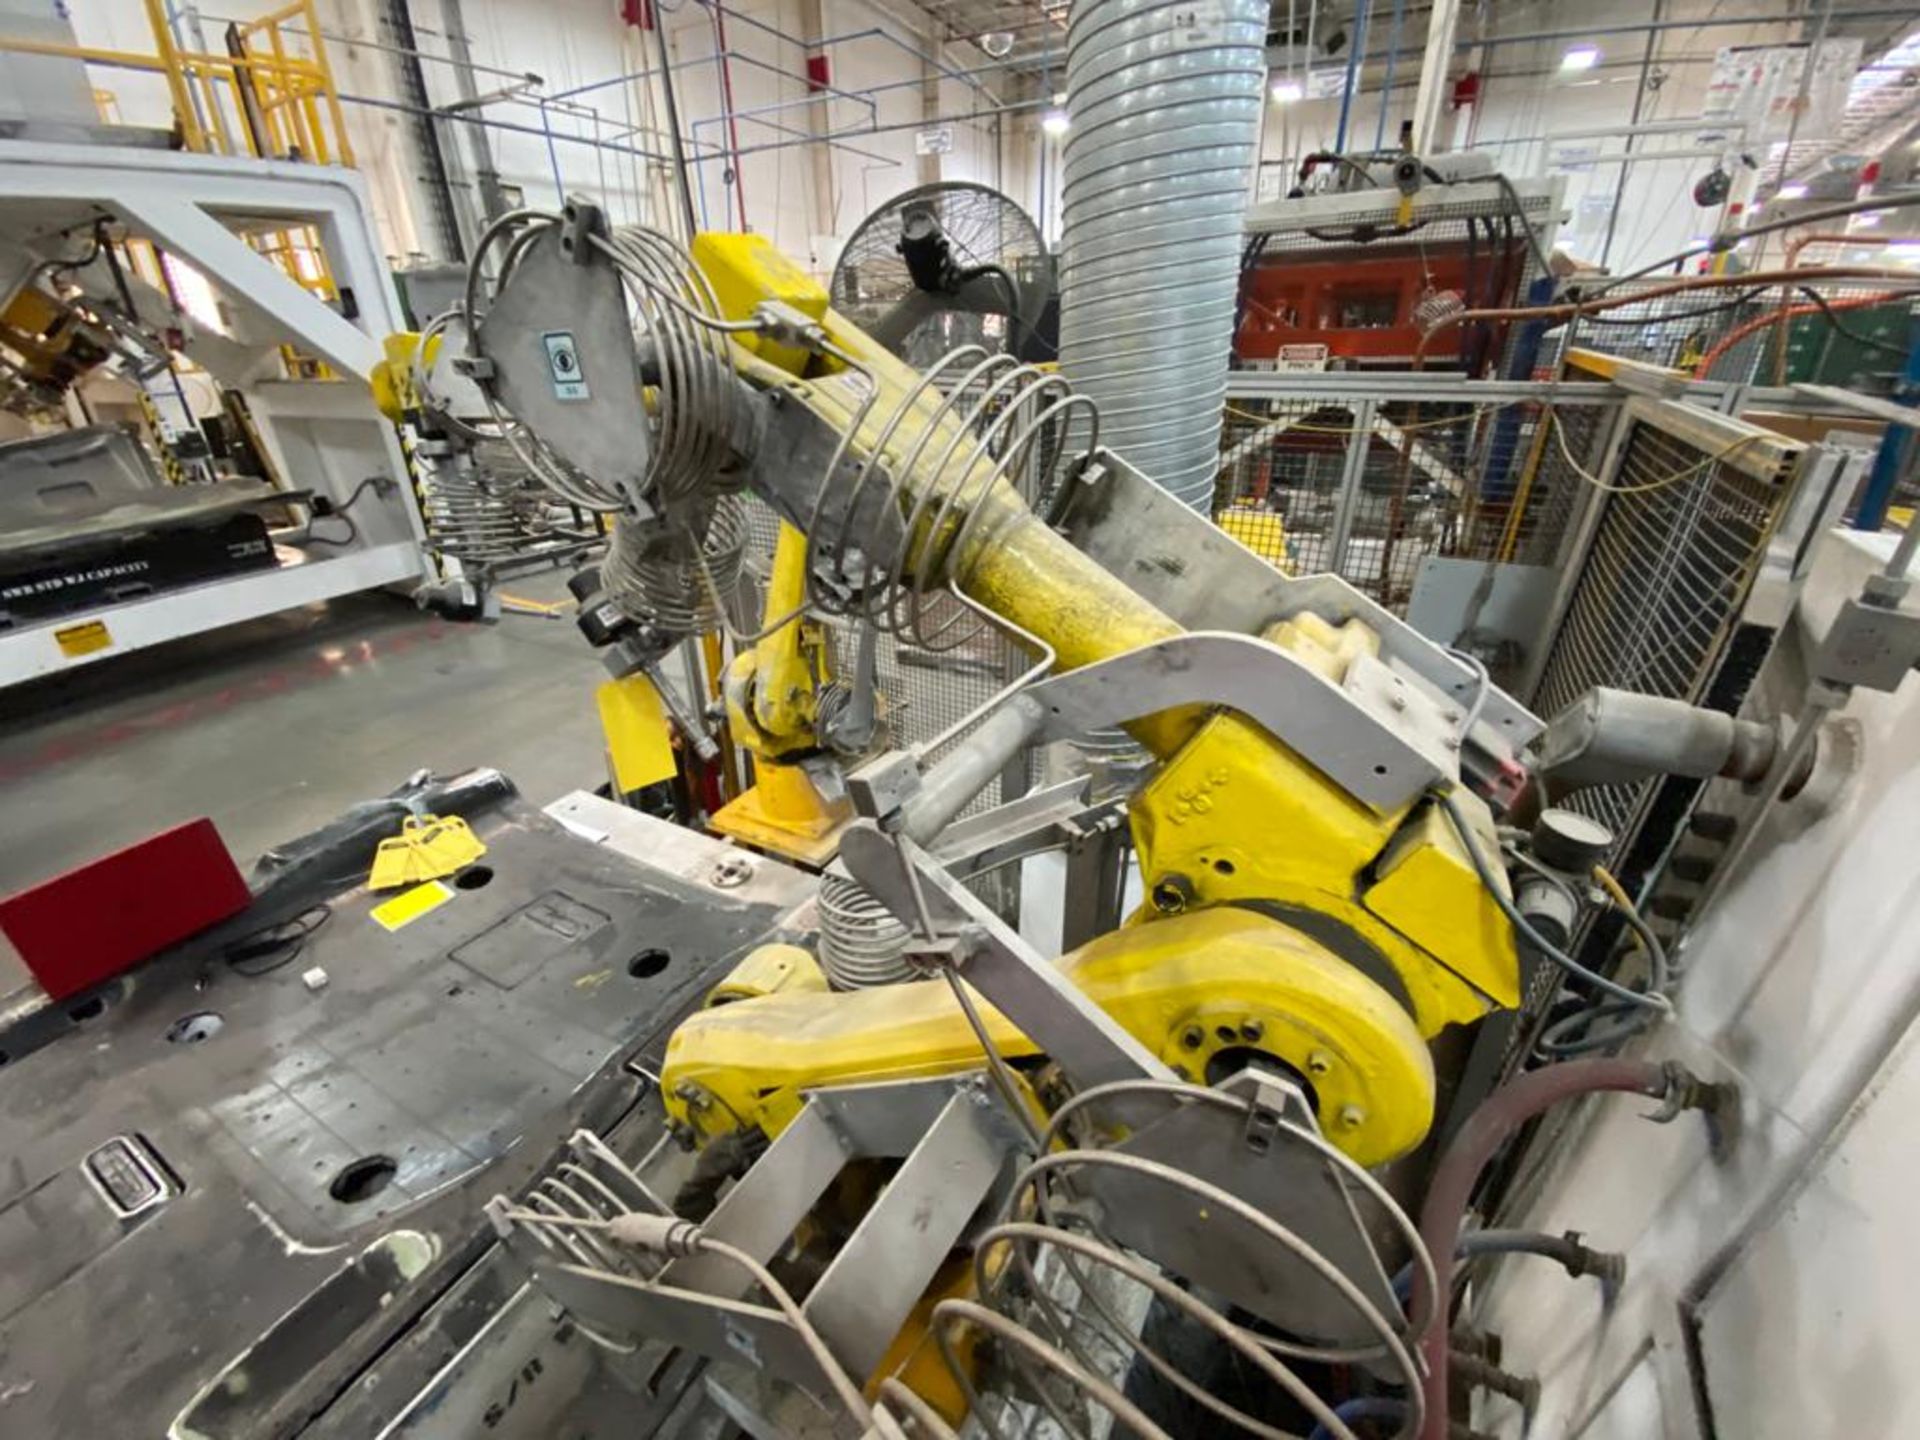 Fanuc articulated Robot, model M-16iB/20 - Image 11 of 27